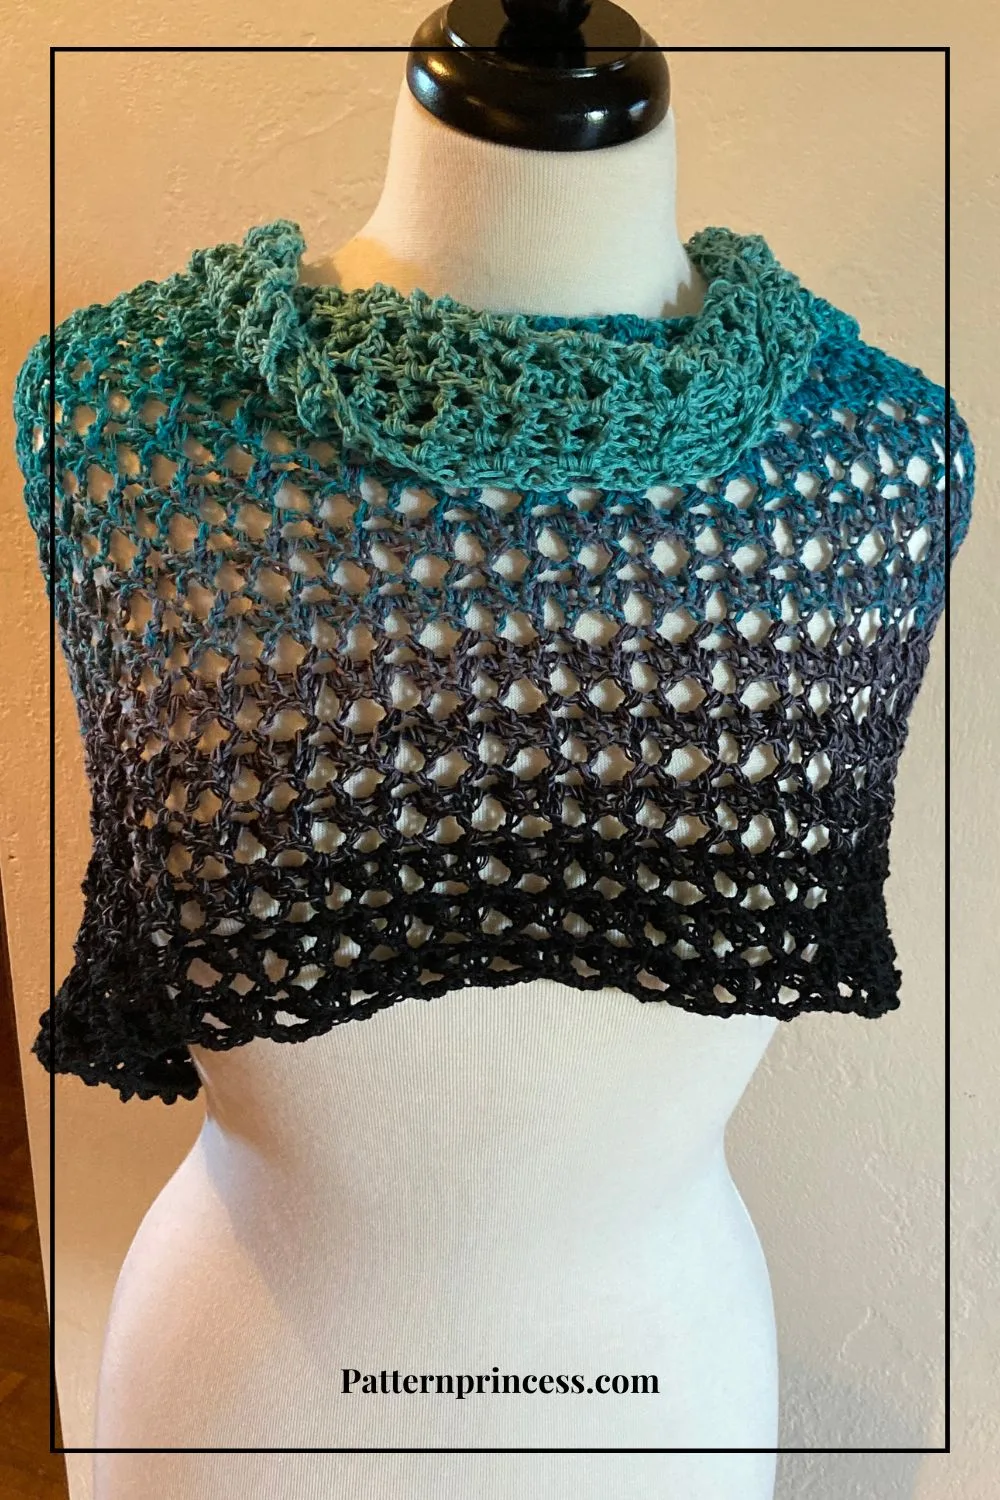 Drape the Shawl Over the Shoulders Front to Back